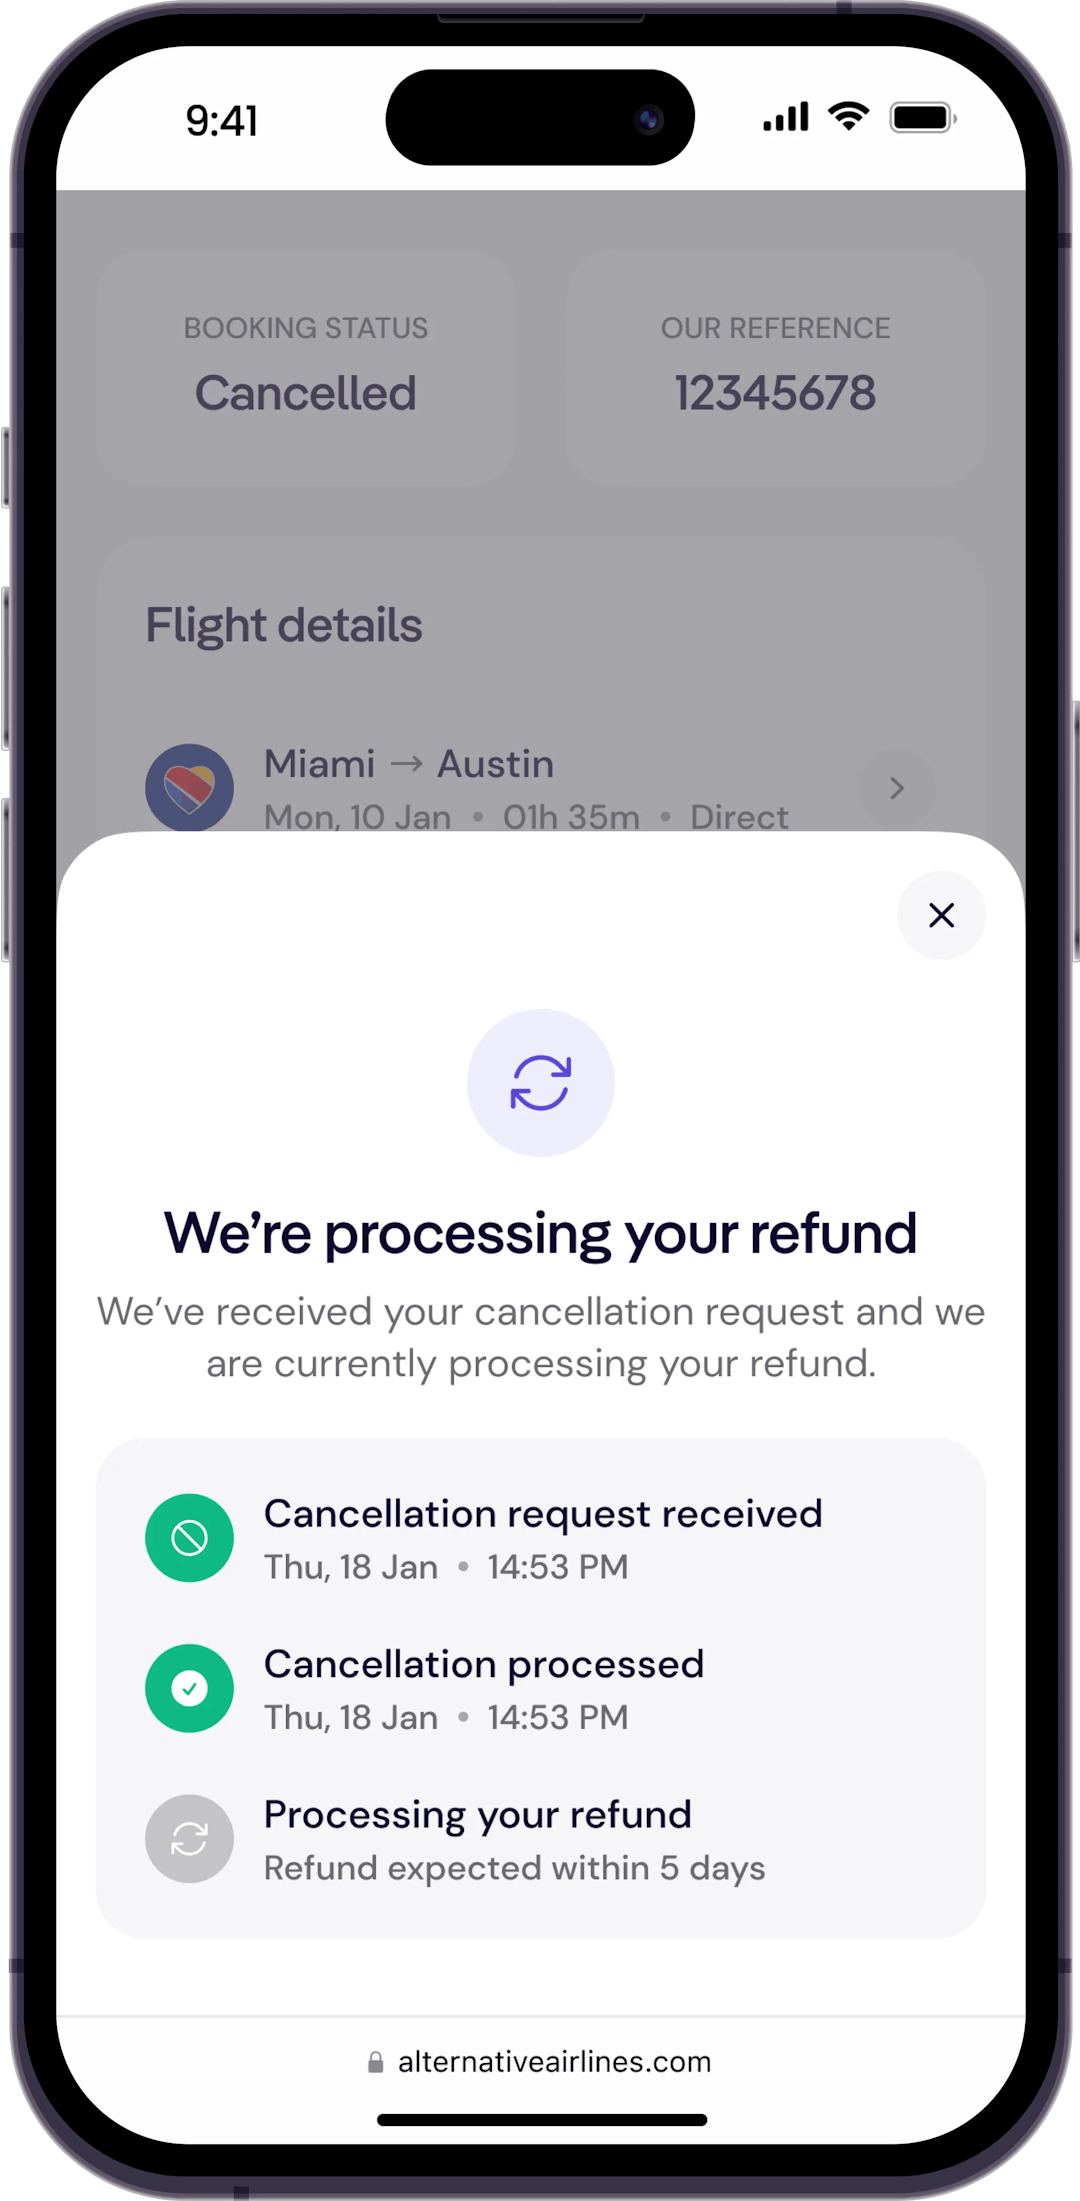 Notification that we are processing your refund